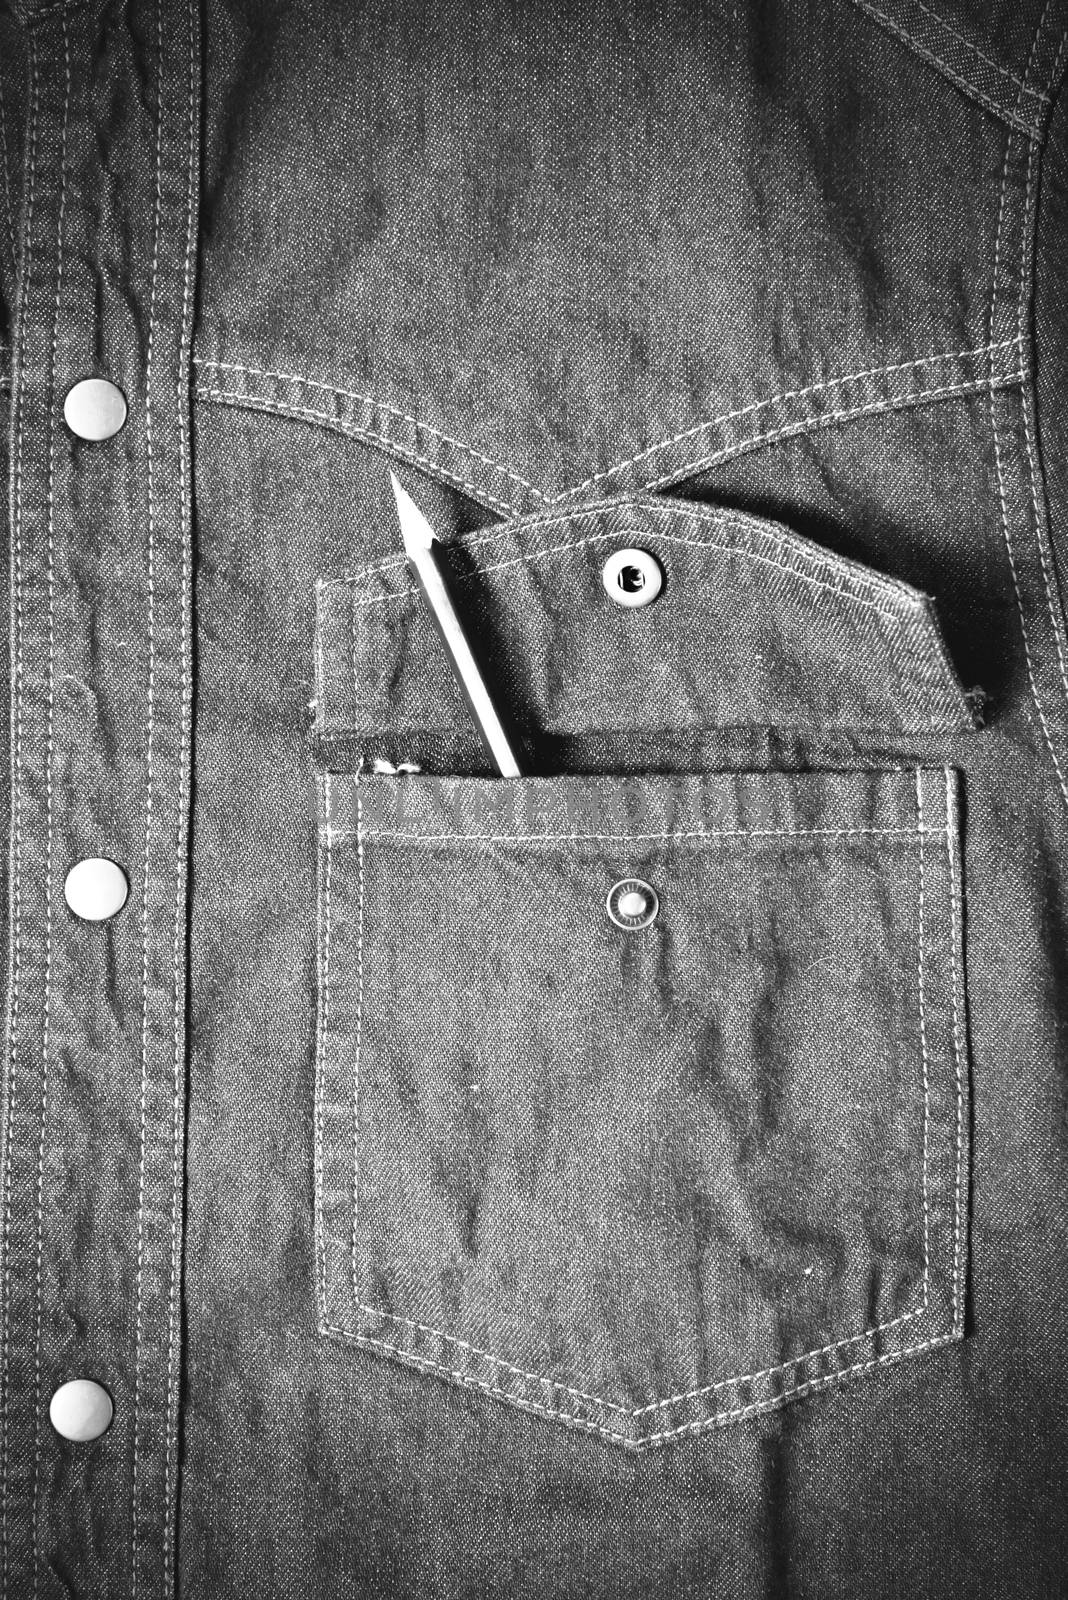 pencil in jean pocket black and white tone color style